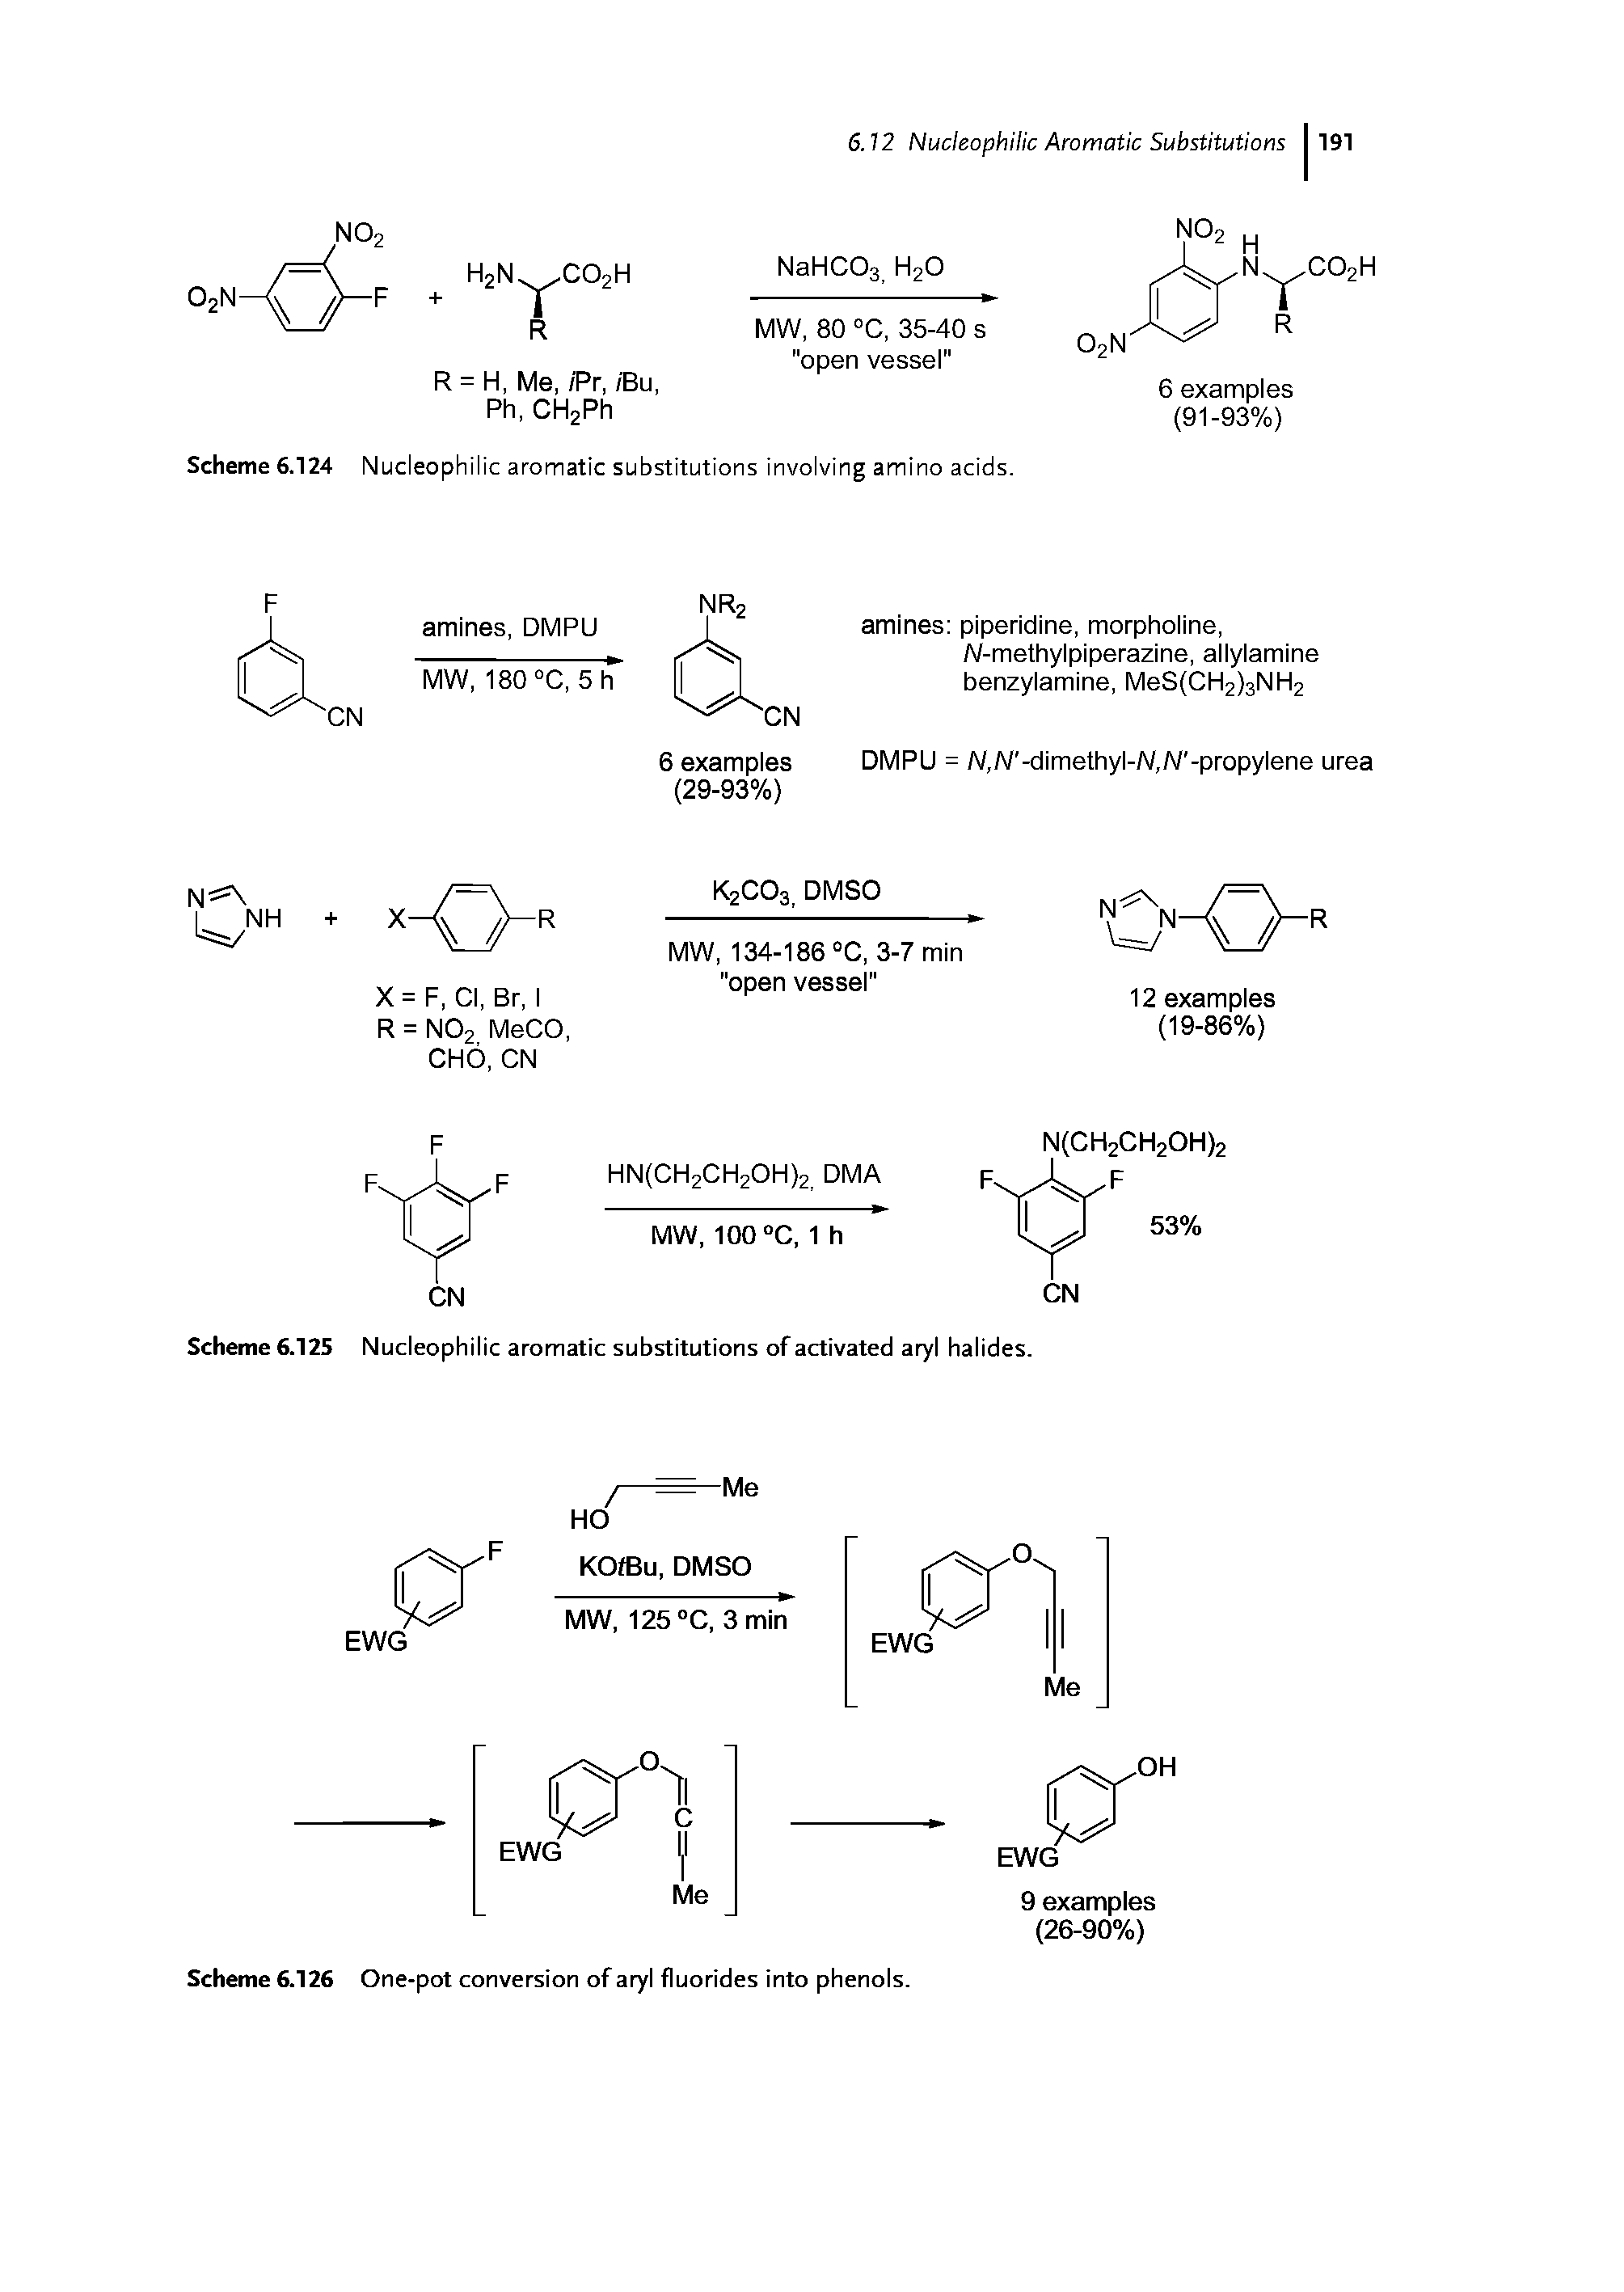 Scheme 6.125 Nucleophilic aromatic substitutions of activated aryl halides.